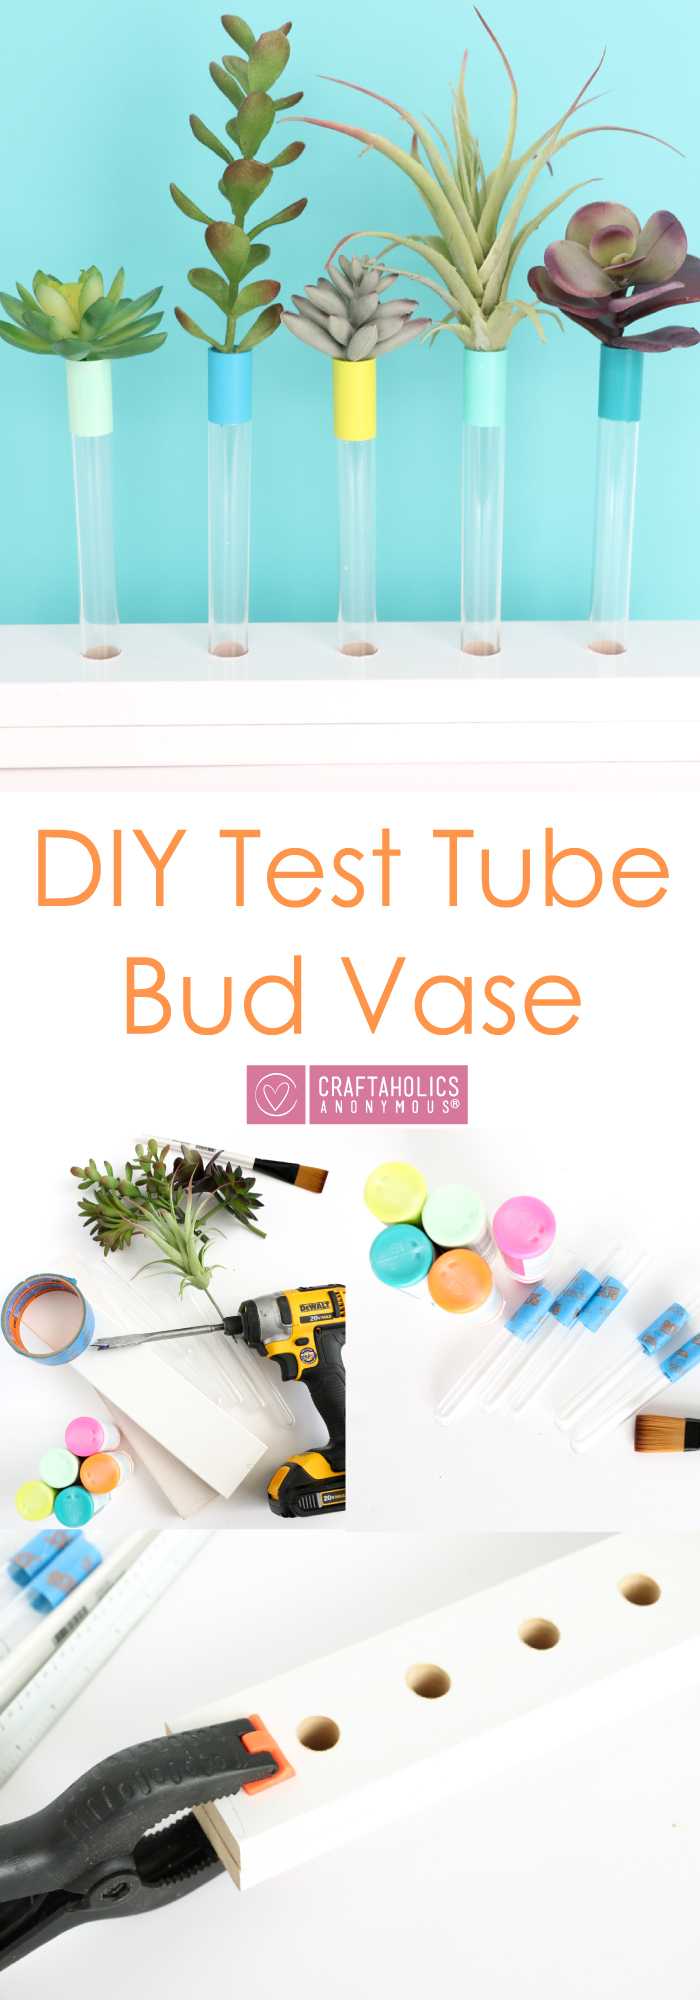 Easy to make test tube bud vases! Make these colorful vases for a cute pop of color with your succulents. Find the tutorial at craftaholicsanonymous.net!